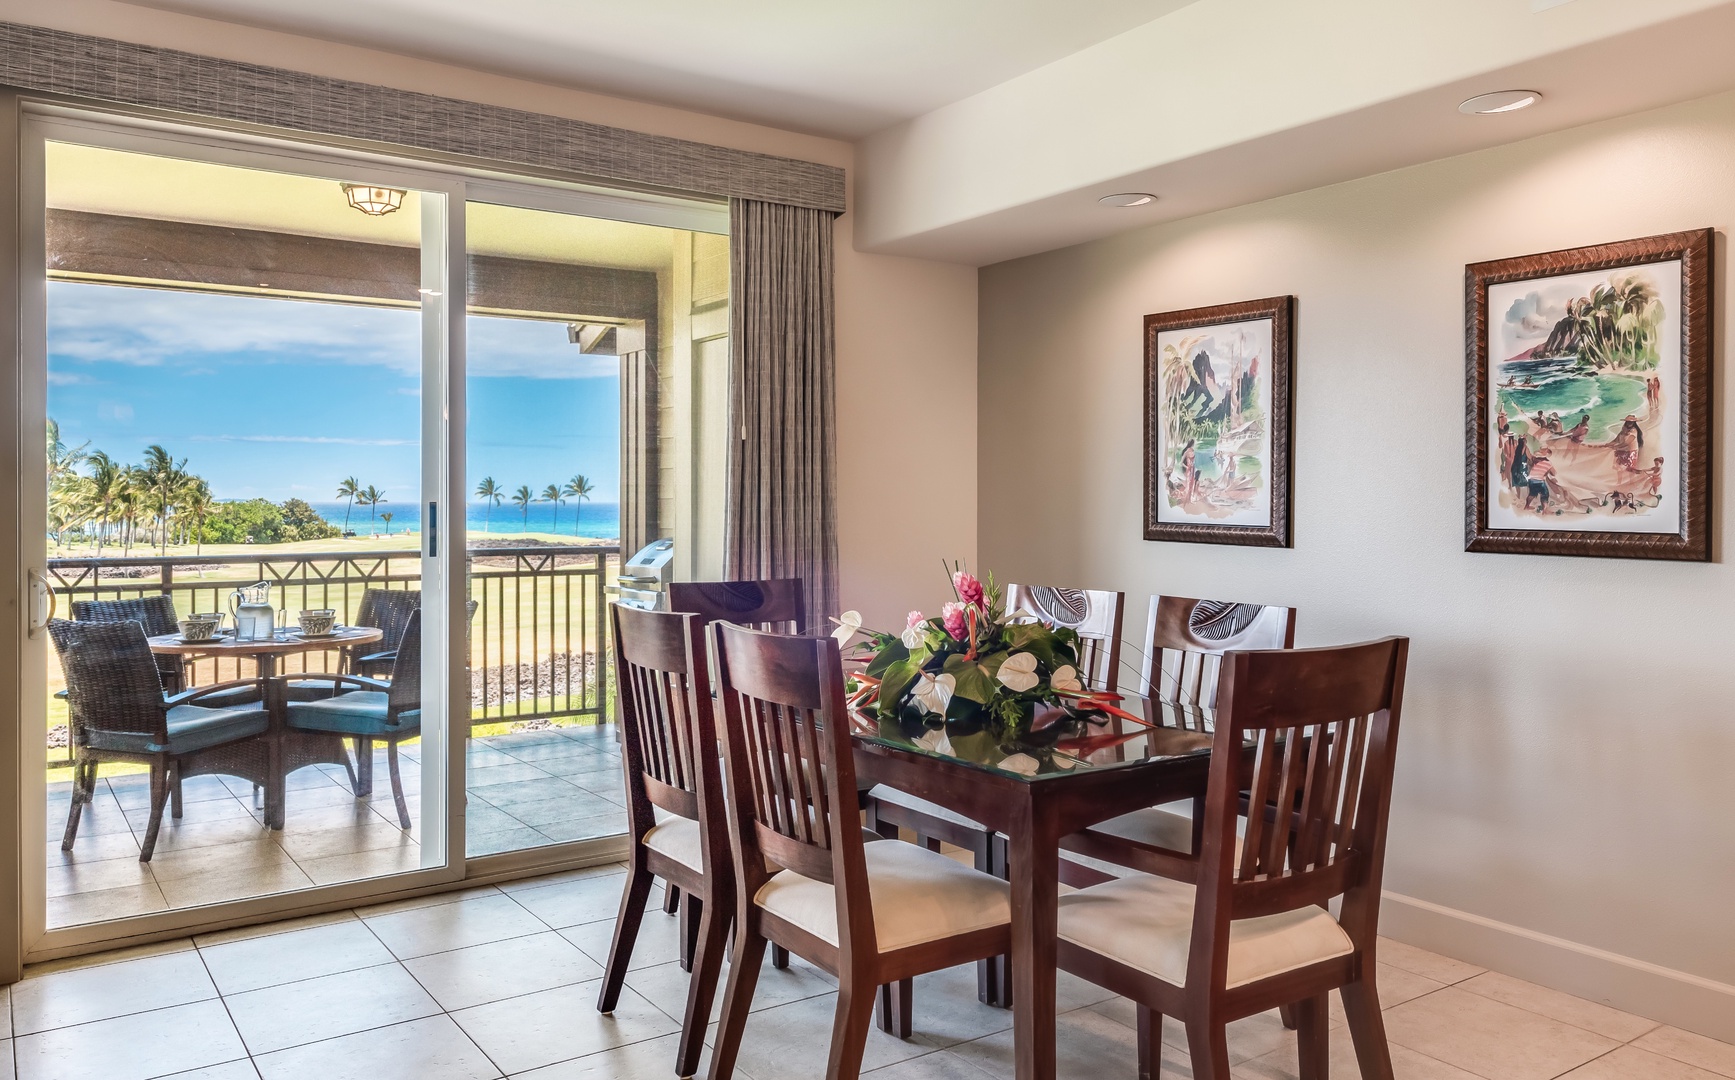 Waikoloa Vacation Rentals, 3BD Hali'i Kai (12G) at Waikoloa Resort - Dine in or out and enjoy the spectacular views!